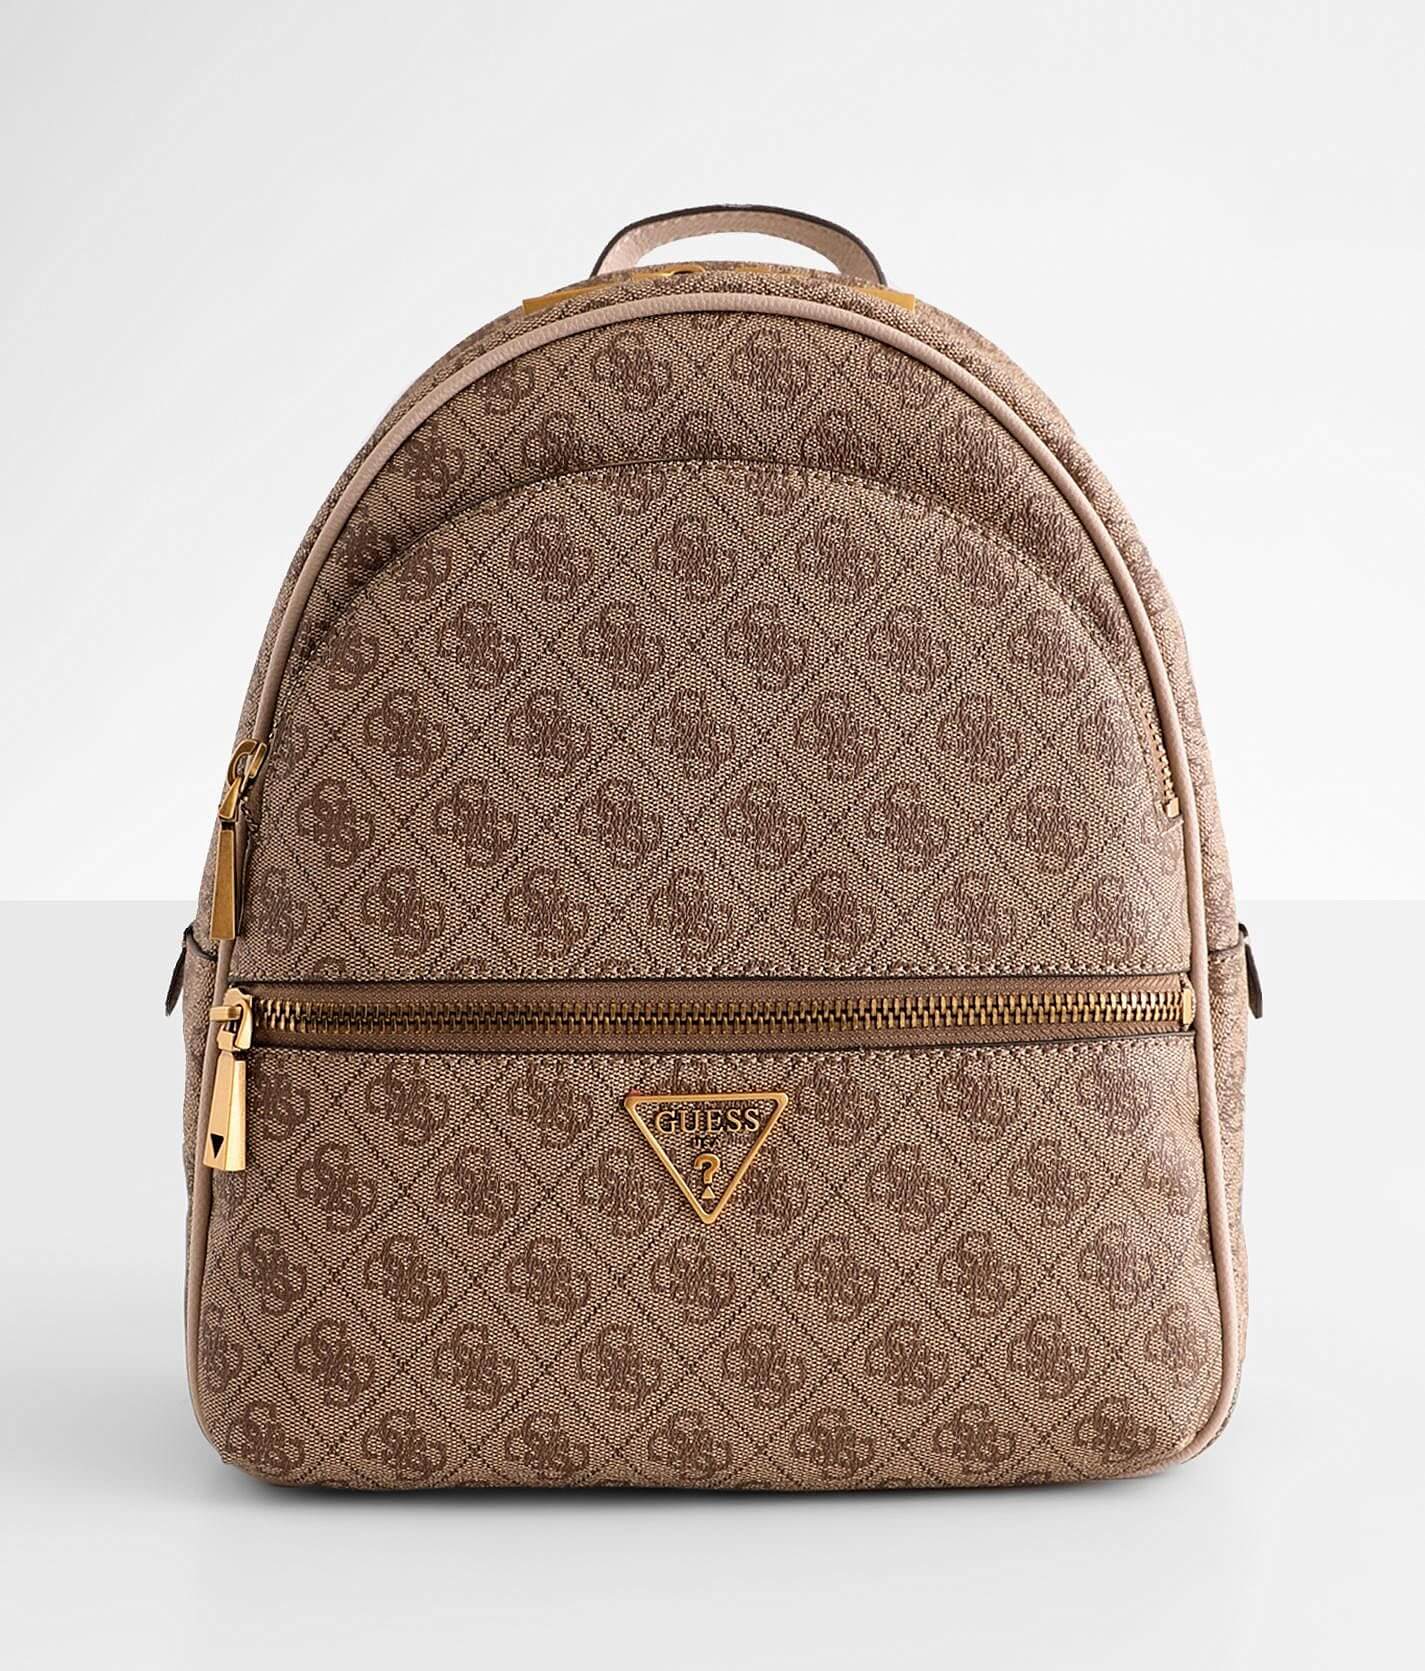  GUESS Manhattan Backpack, Brown : Clothing, Shoes & Jewelry